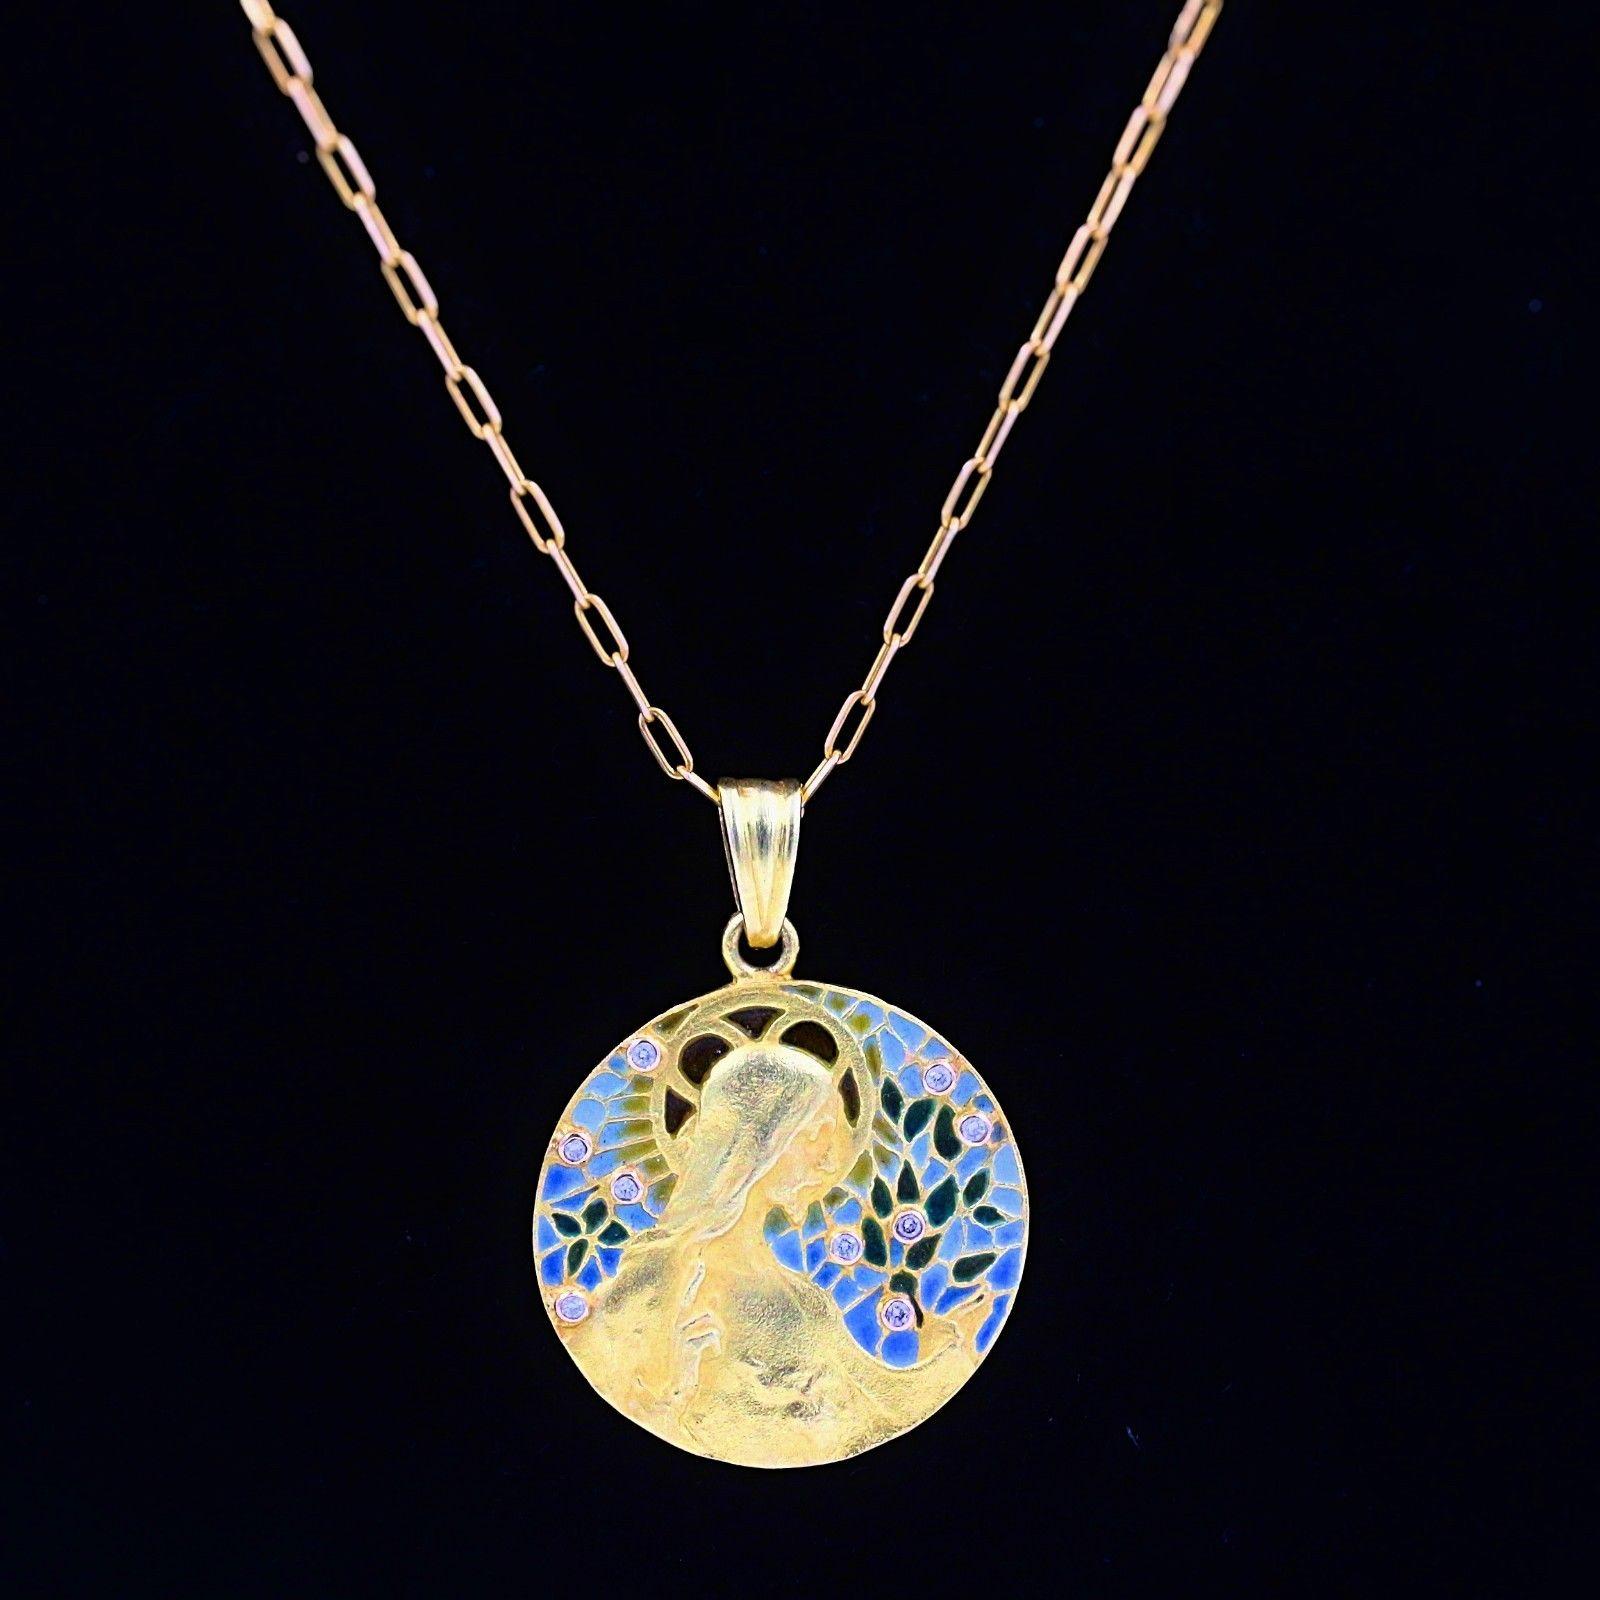 MASIERA JESUS MADLLION PENDANT NECKLACE
Serial Number:  C - 3450 - C
Metal:  18k Yellow Gold
Length:  Chain measures 19.5 inches with a Lobster Clasp / Pendant measures 1.5 inches
Pendant Width:  35 MM top to bottom / 26 MM left to right / 1 inch